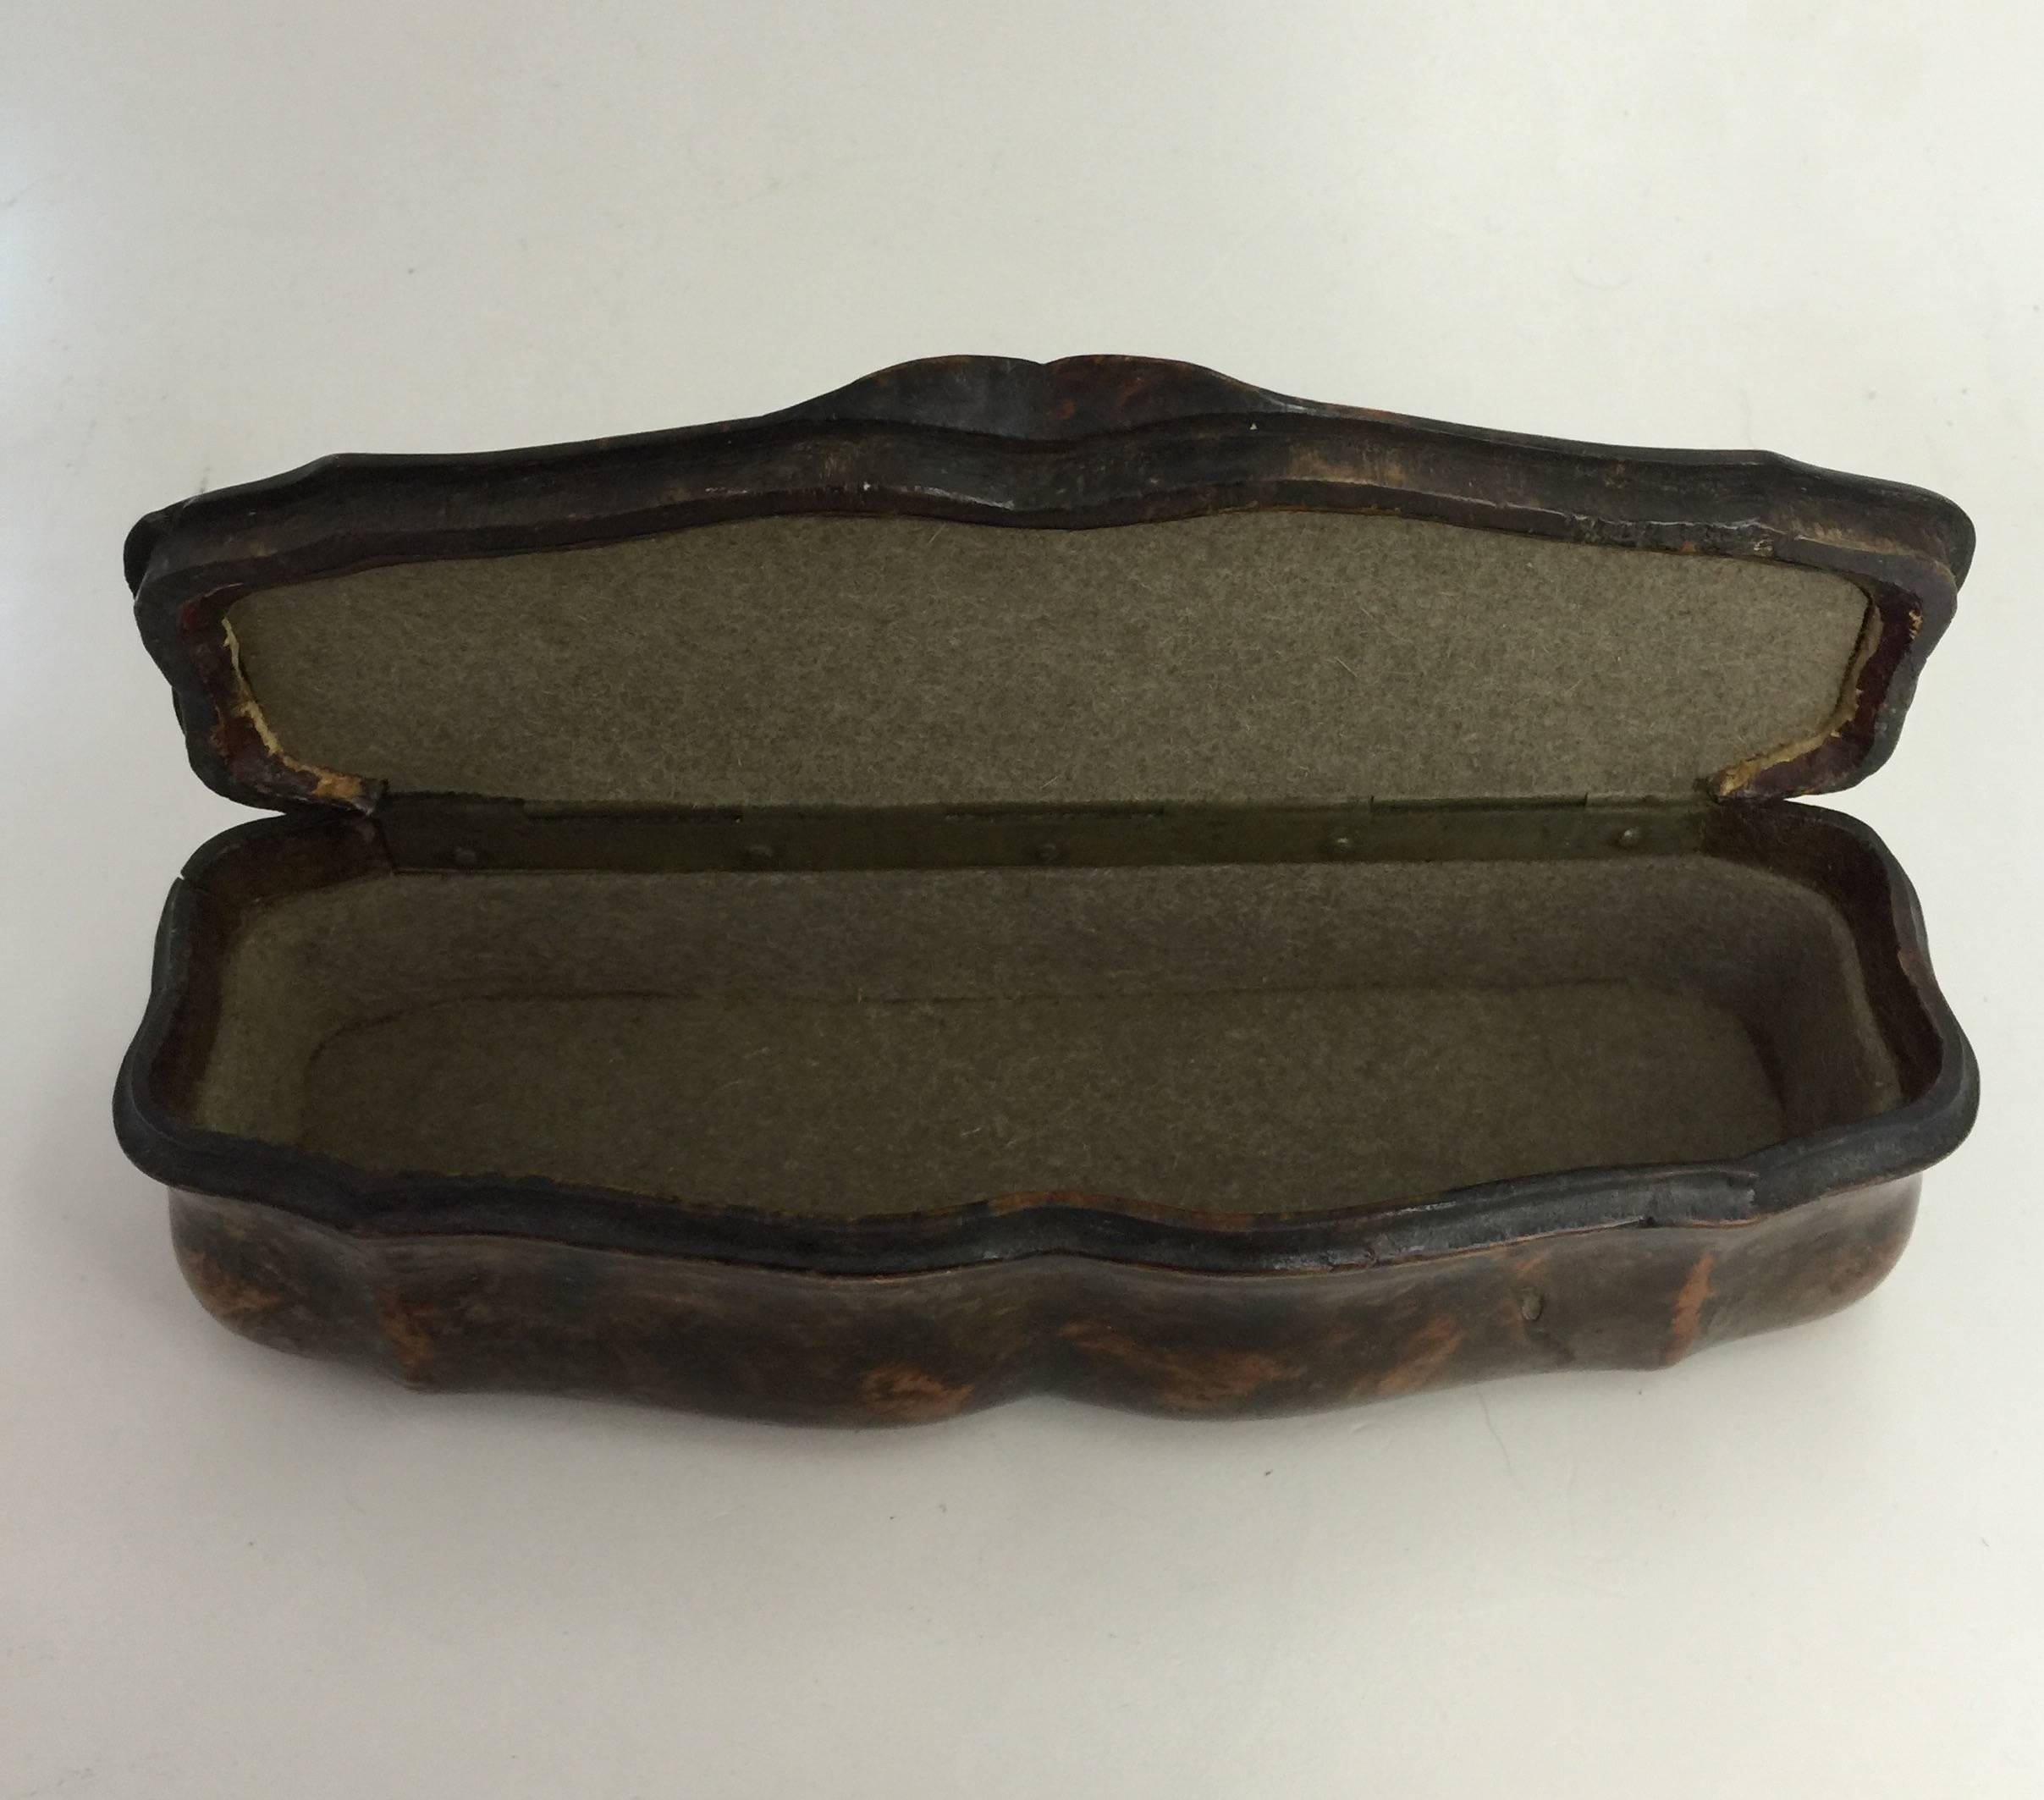 Burlwood Box of Rectangular Form, 19th Century, Probably English In Good Condition For Sale In Spencertown, NY